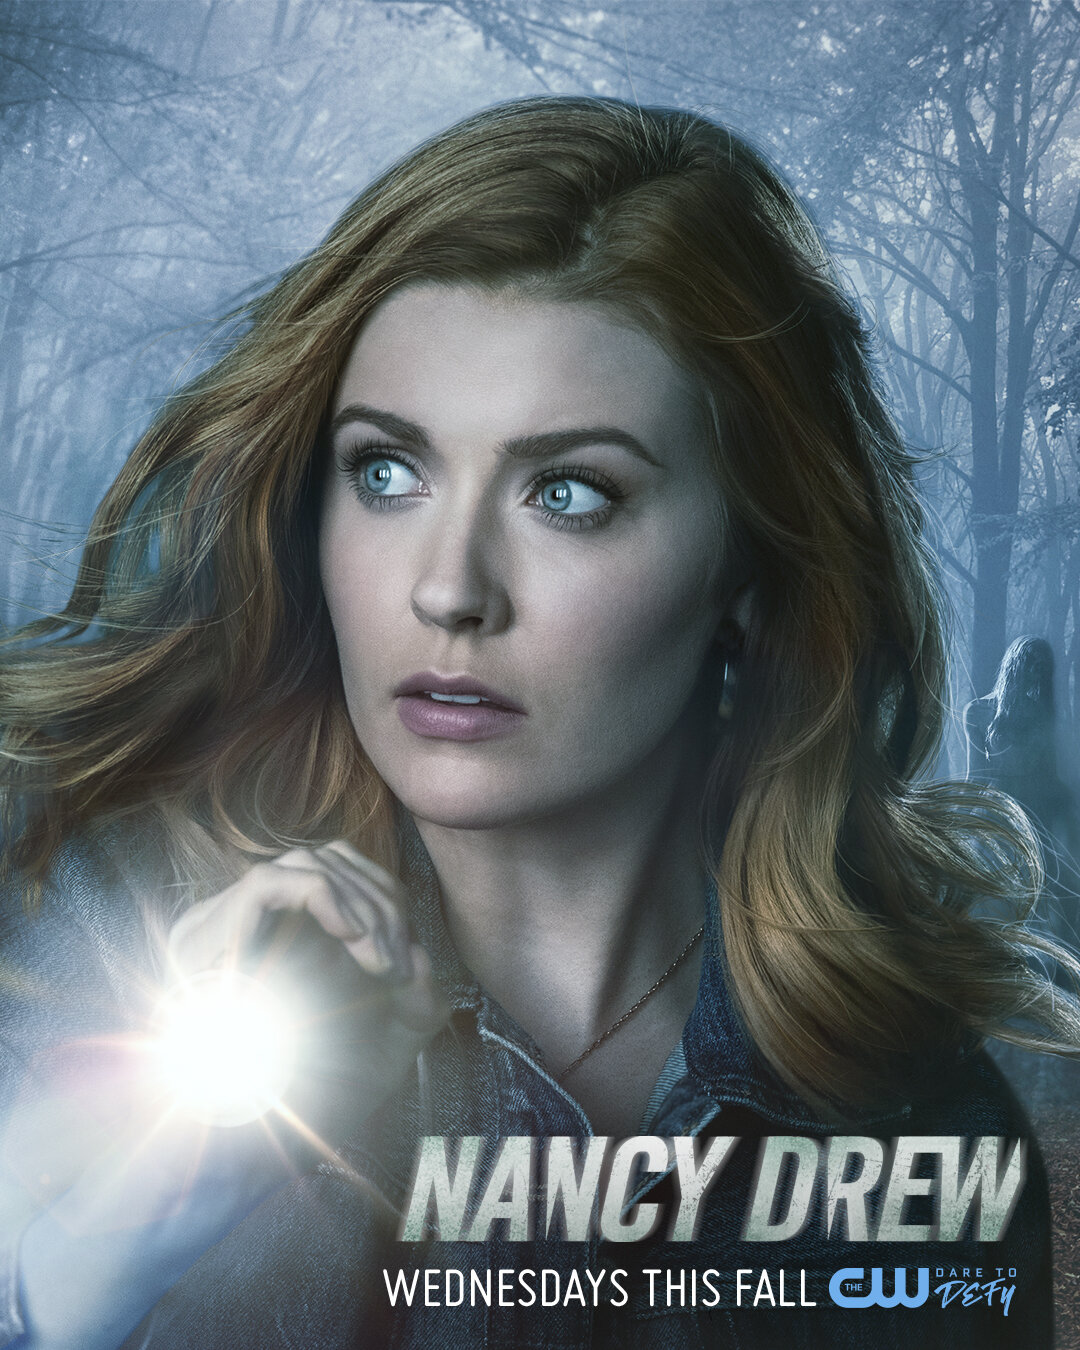 Promotional Material for "Nancy Drew"